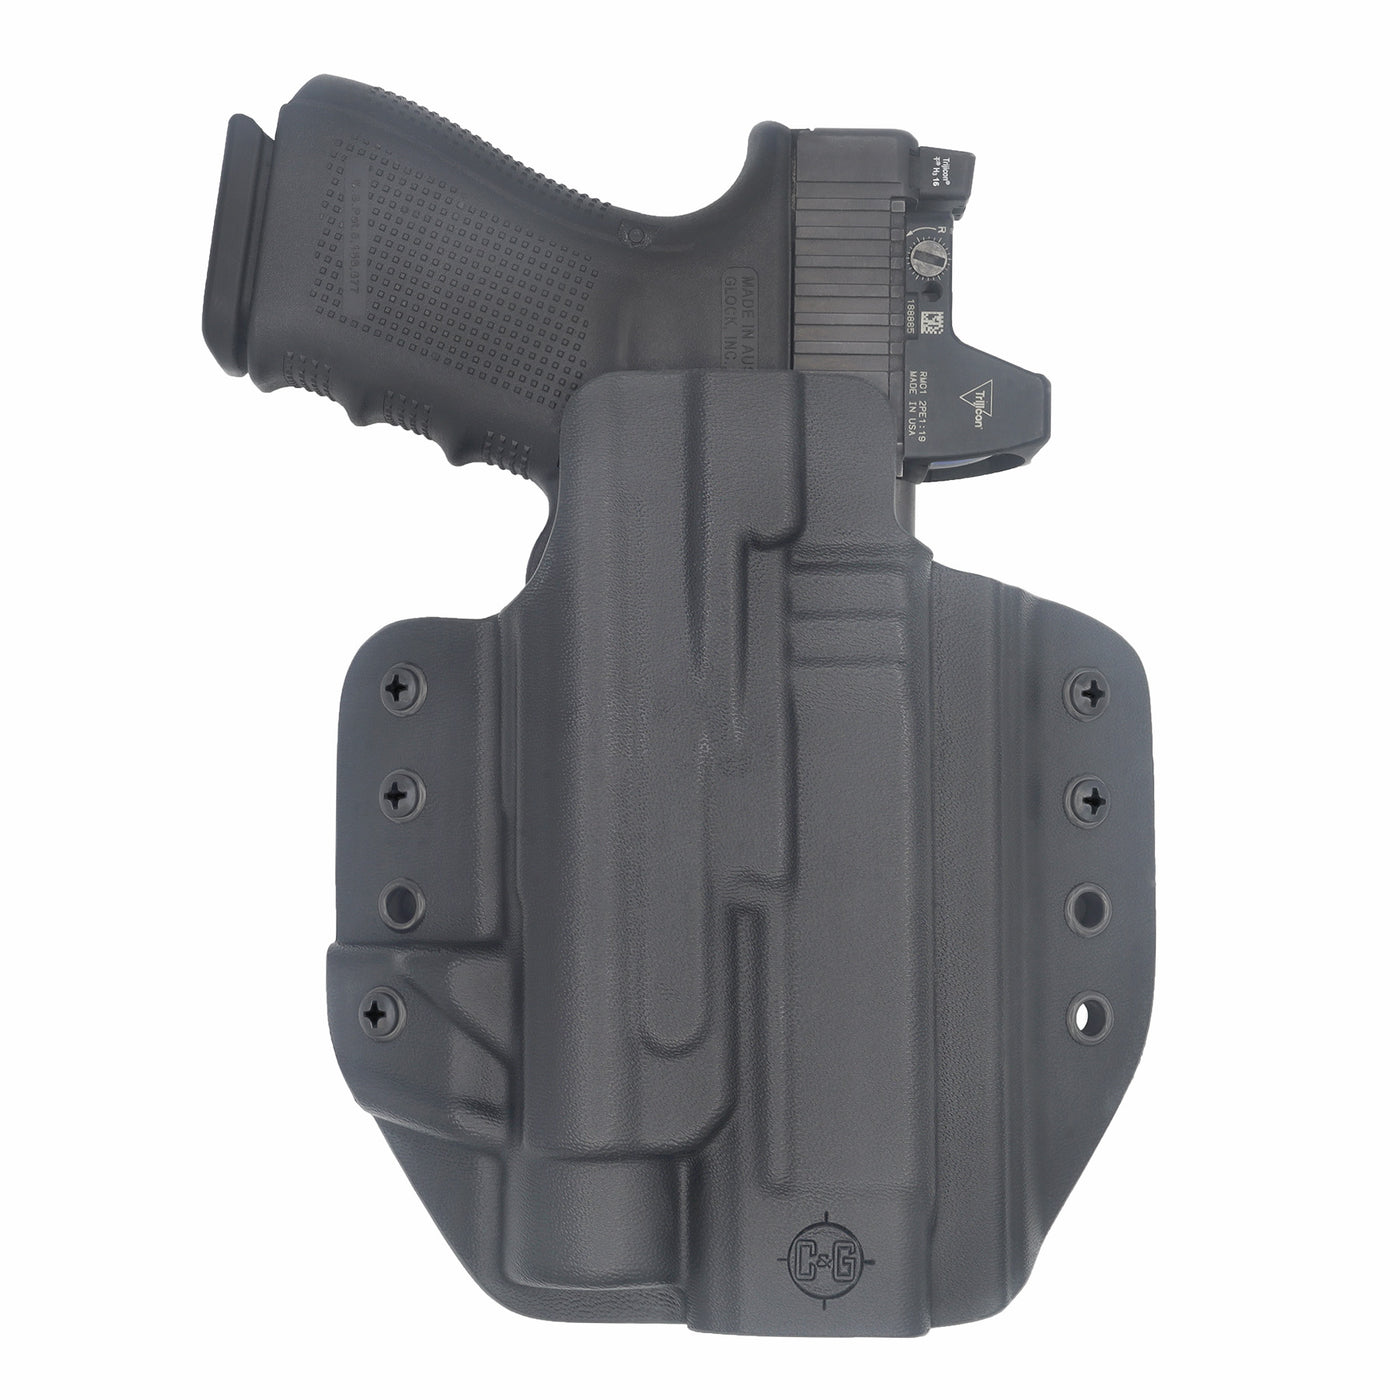 C&G Holsters quickship OWB Tactical CZ P10/c Streamlight TLR-1 in holstered position